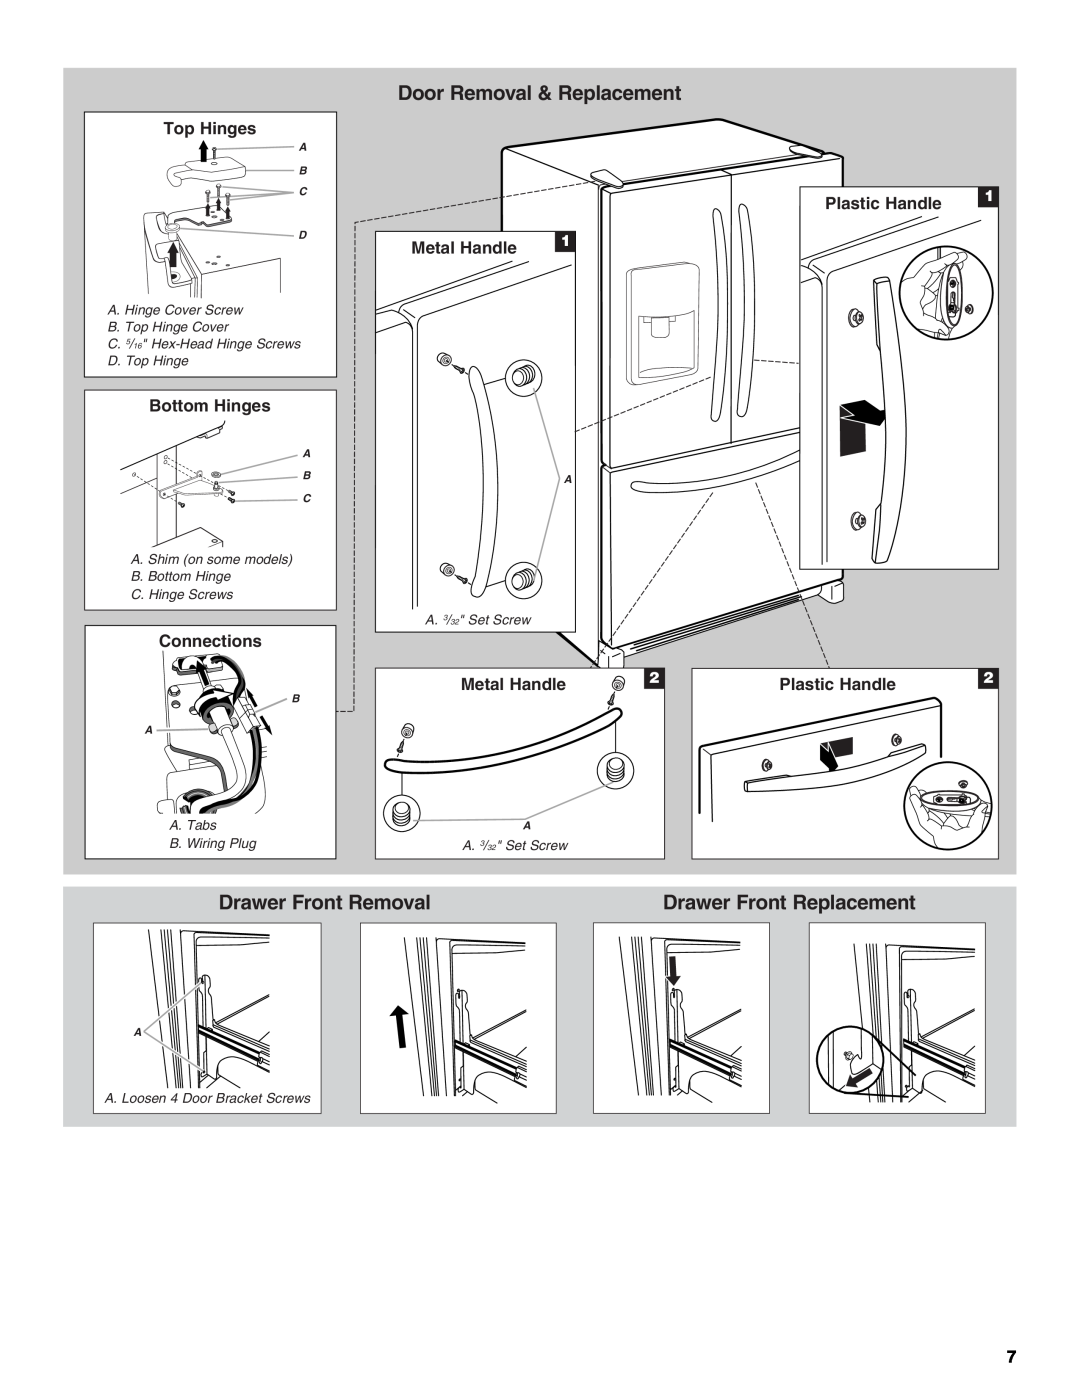 Maytag W10175477A Door Removal & Replacement, Drawer Front Removal, Drawer Front Replacement, Top Hinges, Bottom Hinges 